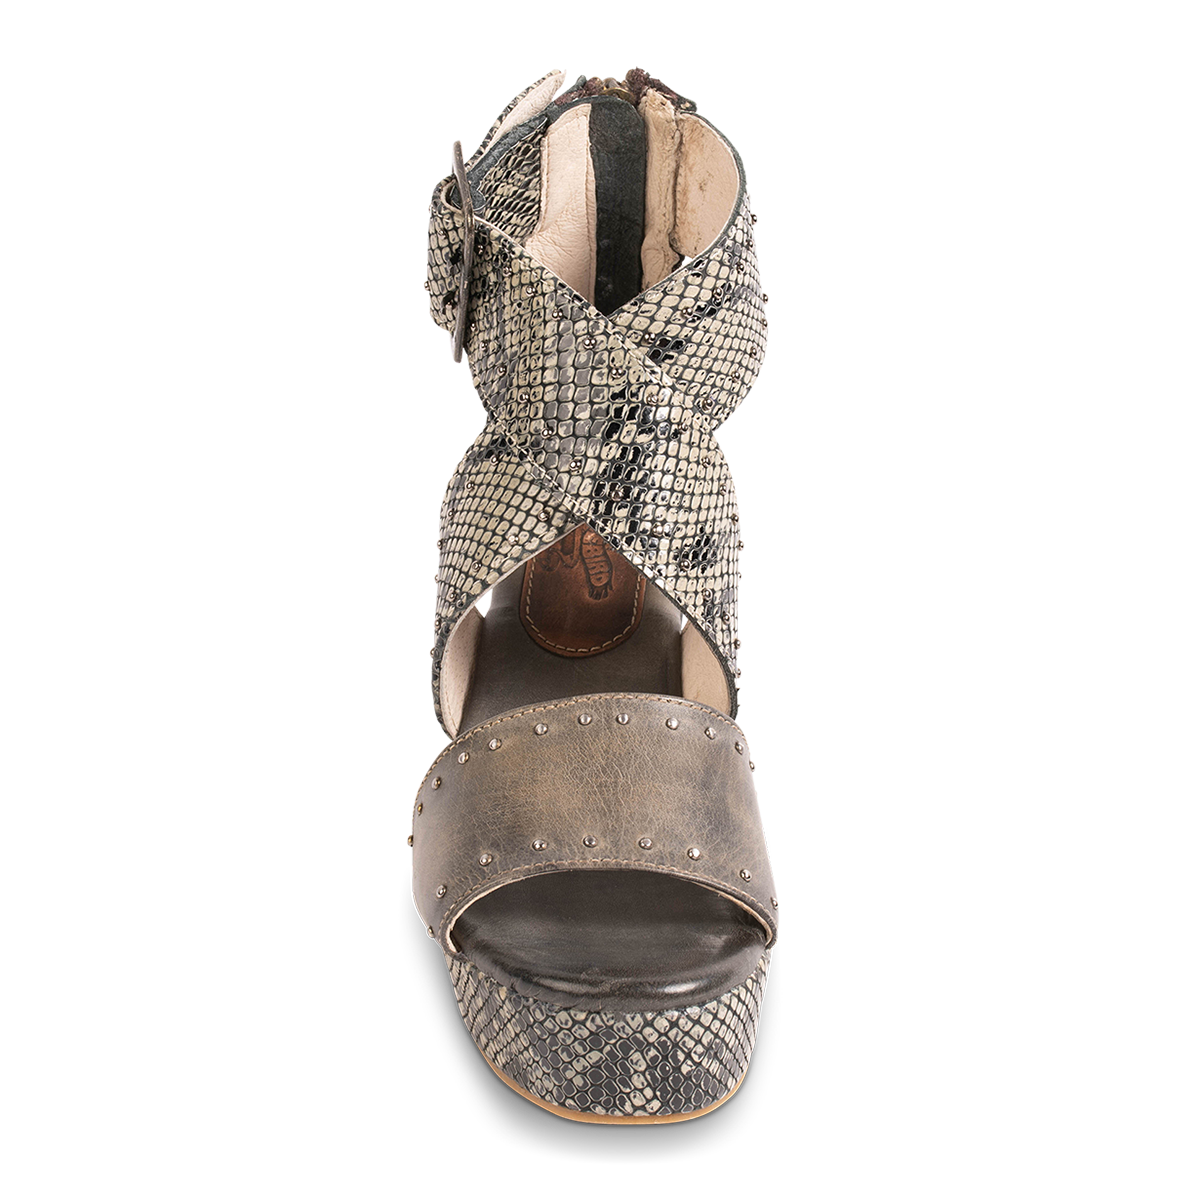 Front view showing cross-over ankle straps on FREEBIRD women's Terra olive snake multi platform sandal with wedge heel and stud detailing